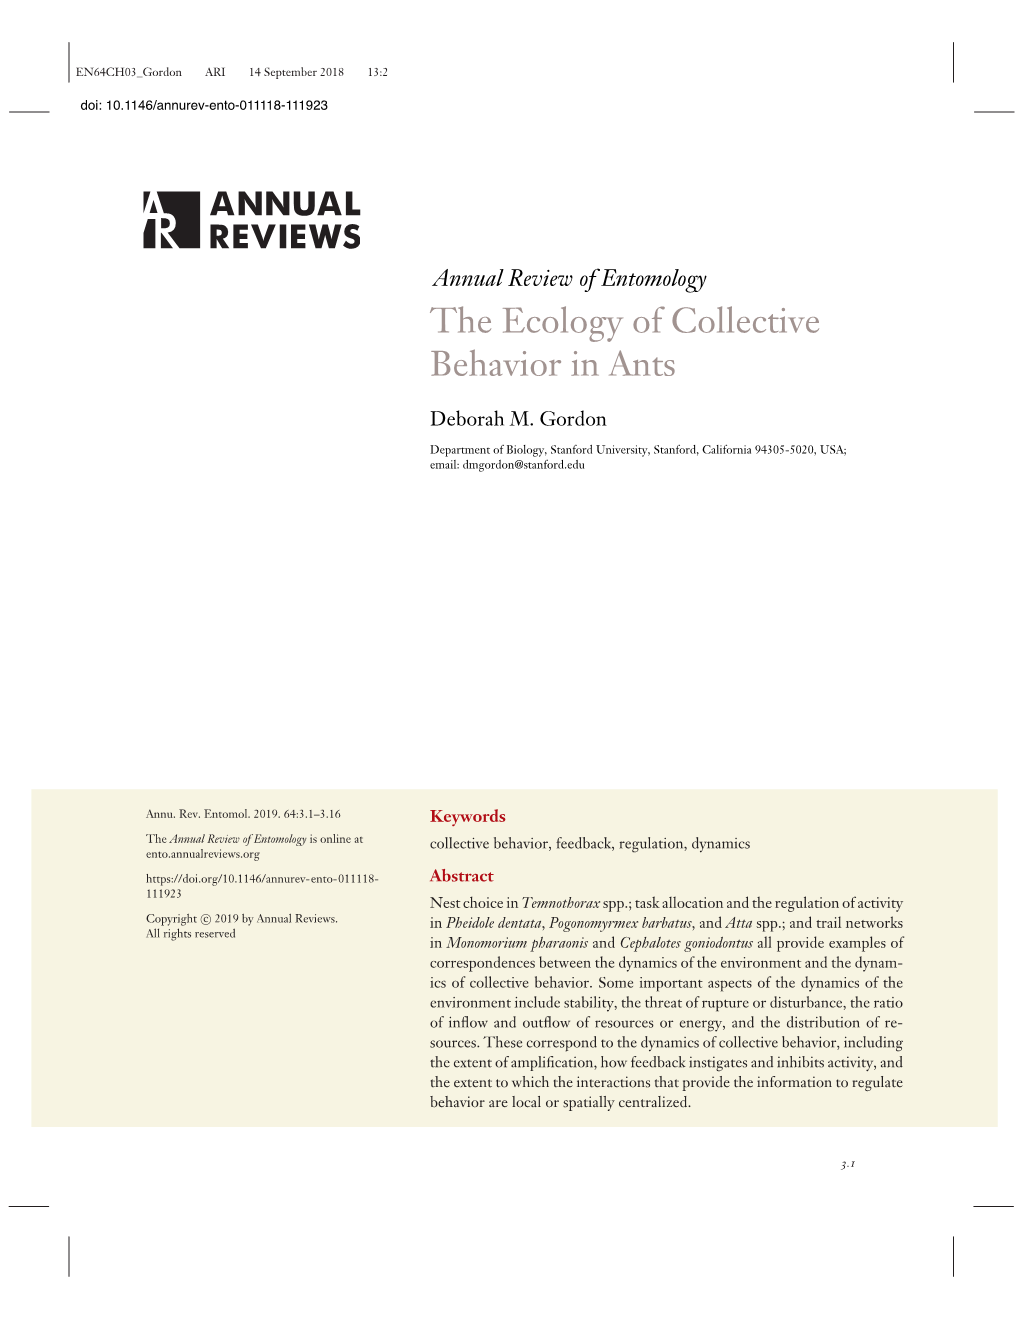 The Ecology of Collective Behavior in Ants